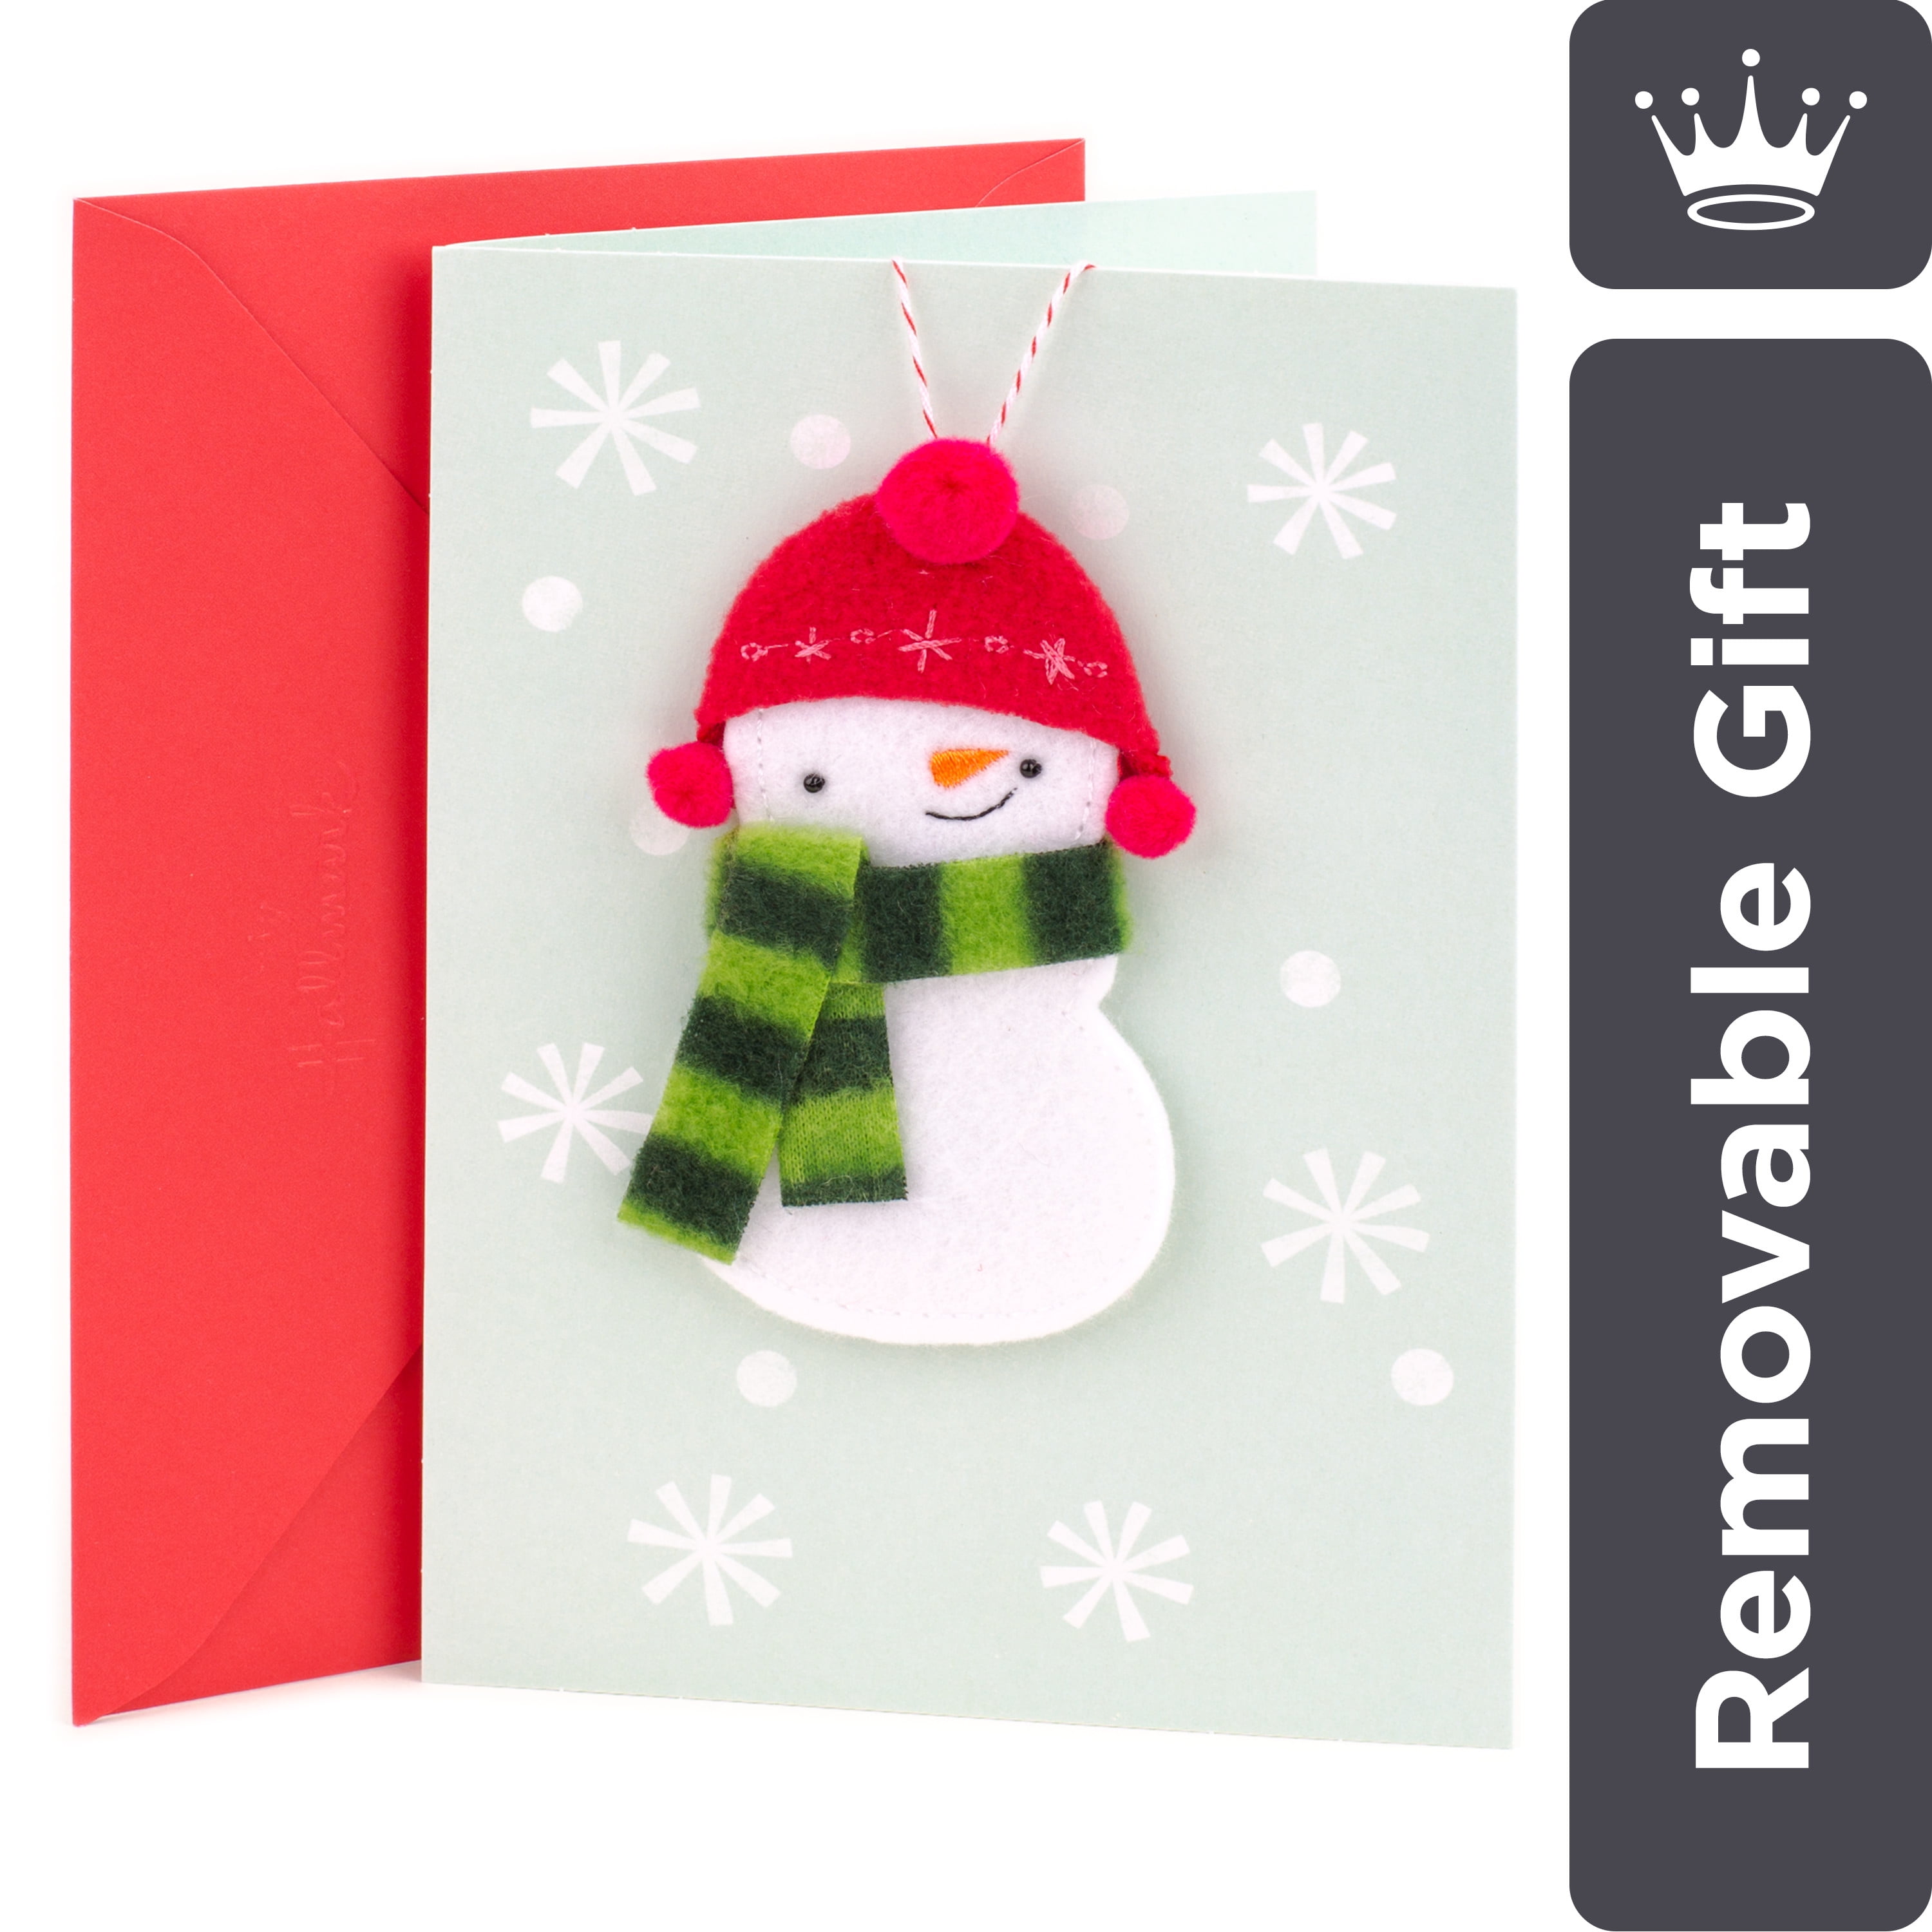 Happy Holidays Snowman with Die Cut Snowflakes 3-D Handmade Holiday Card